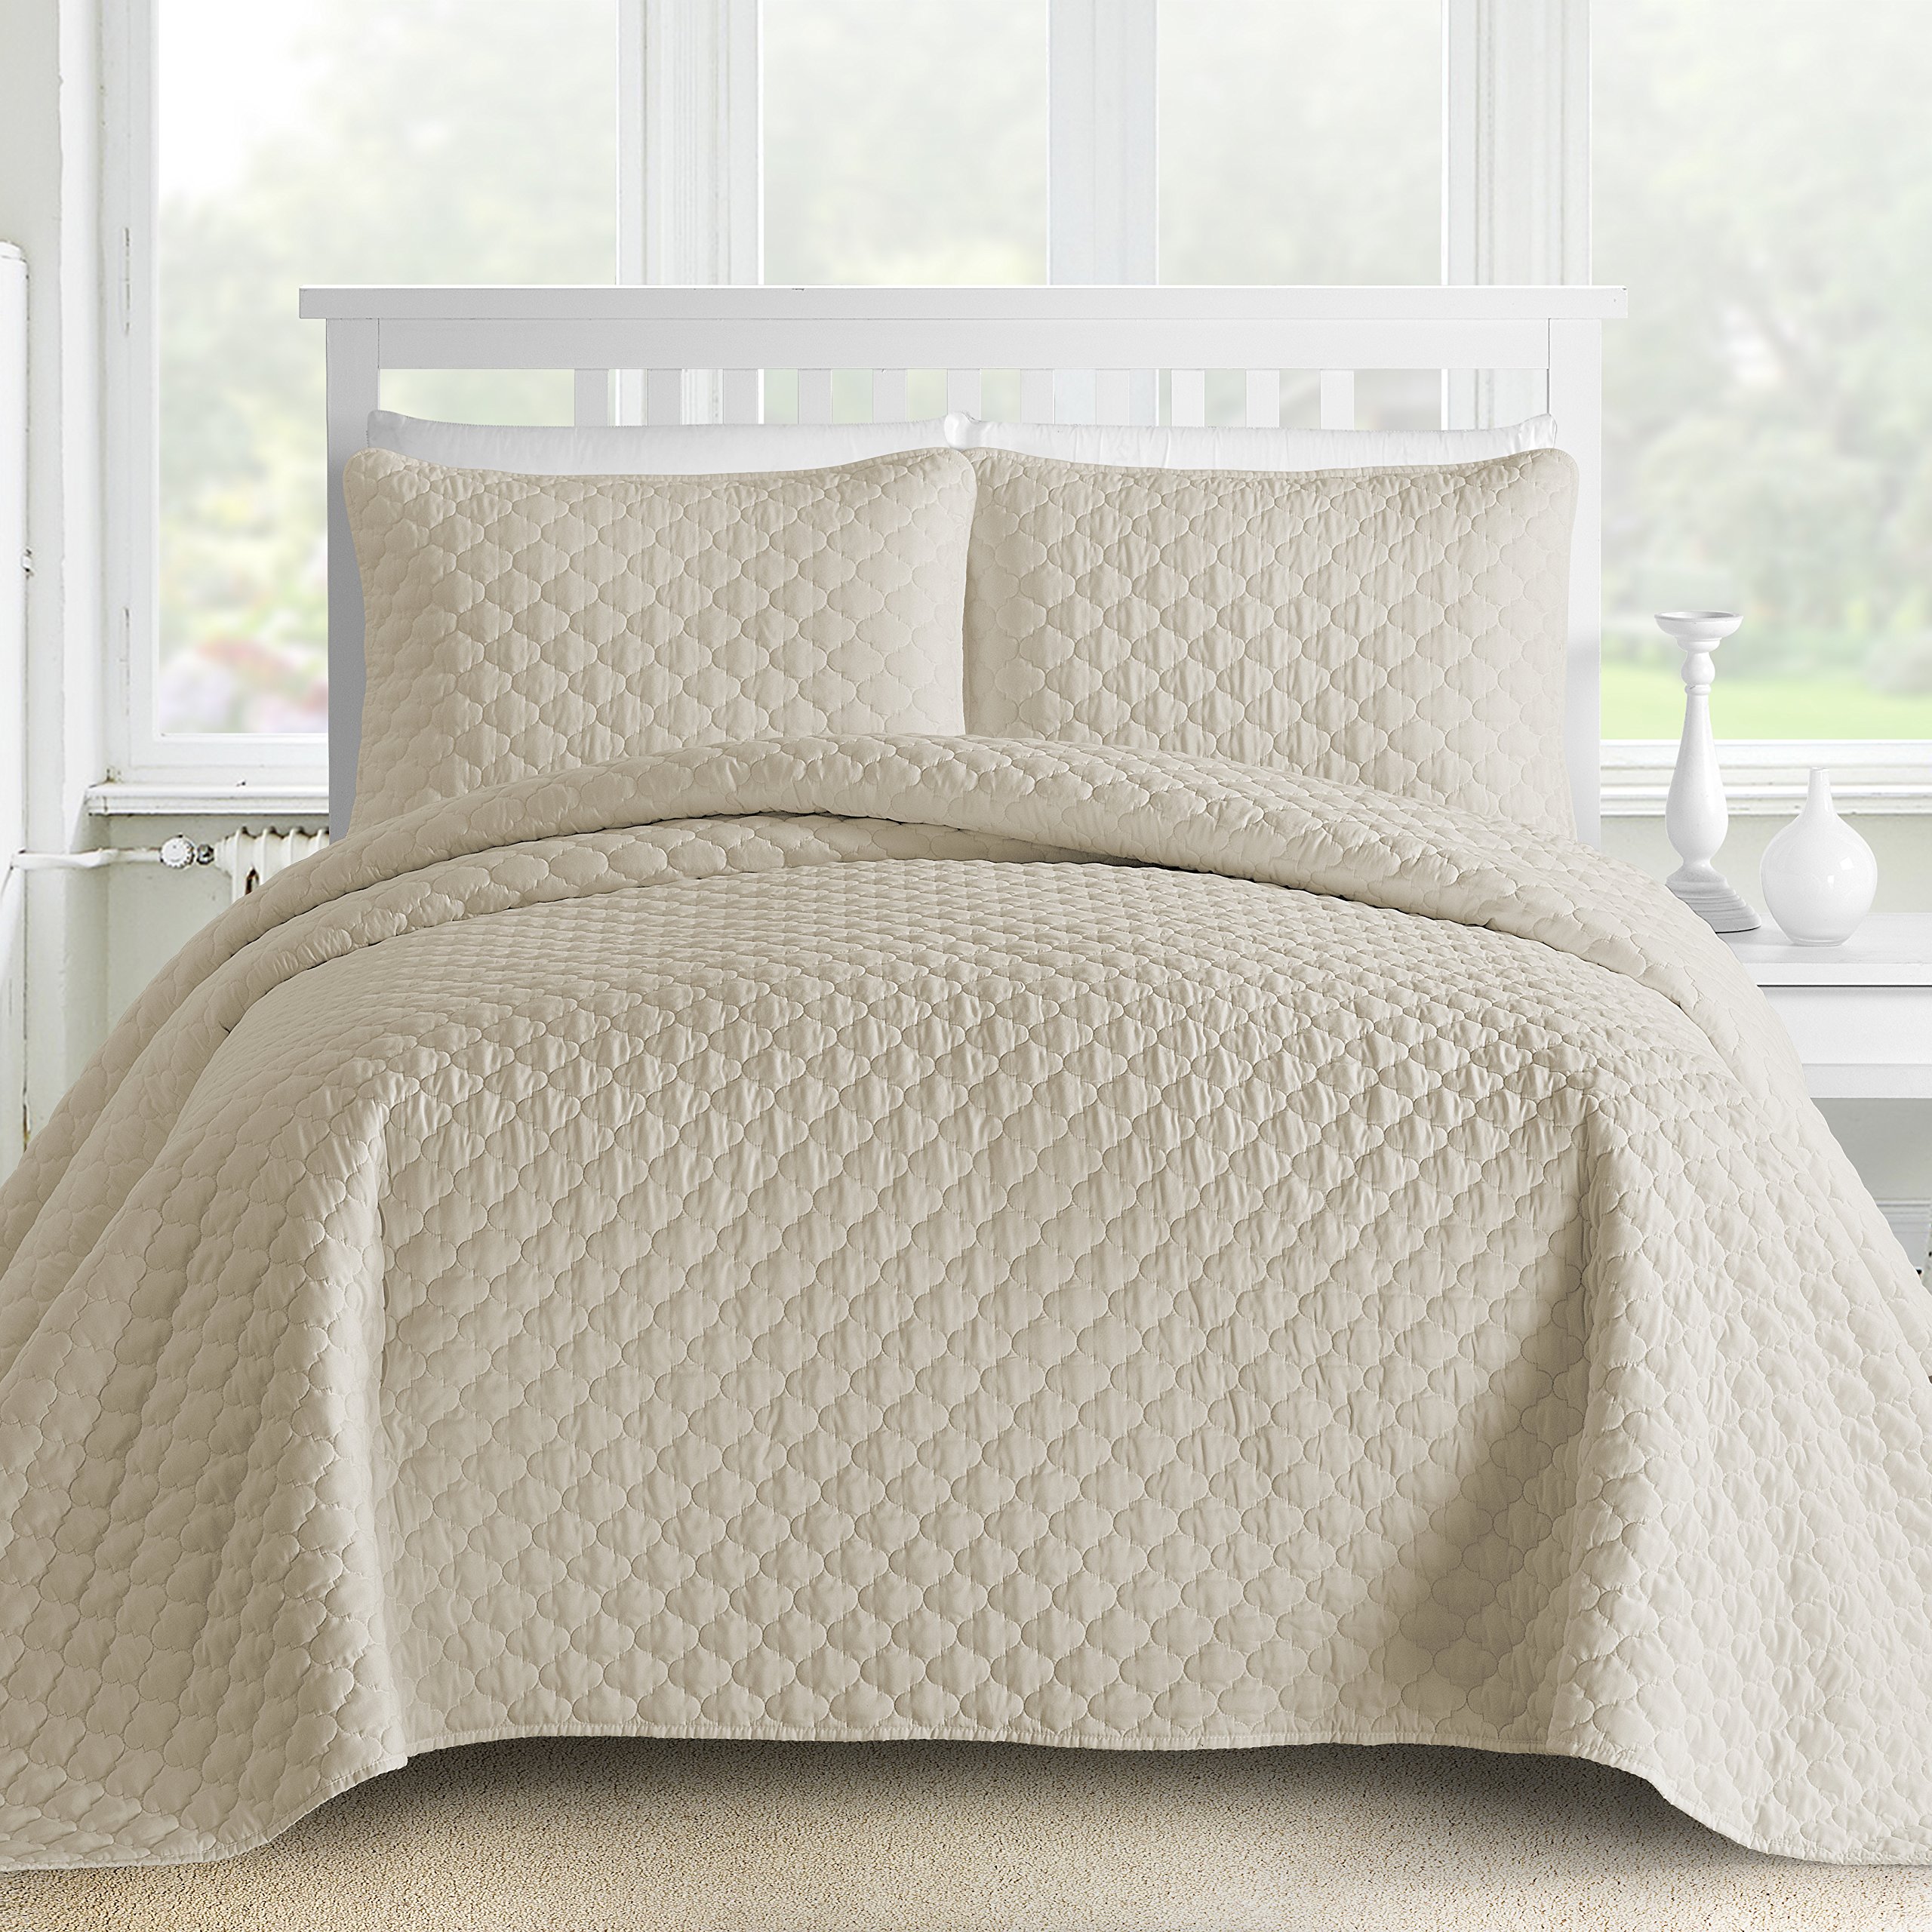 Book Cover Comfy Bedding Oversized and Prewashed Lantern Ogee Quilted Bedspread Coverlet Set, King/Cal King, Beige